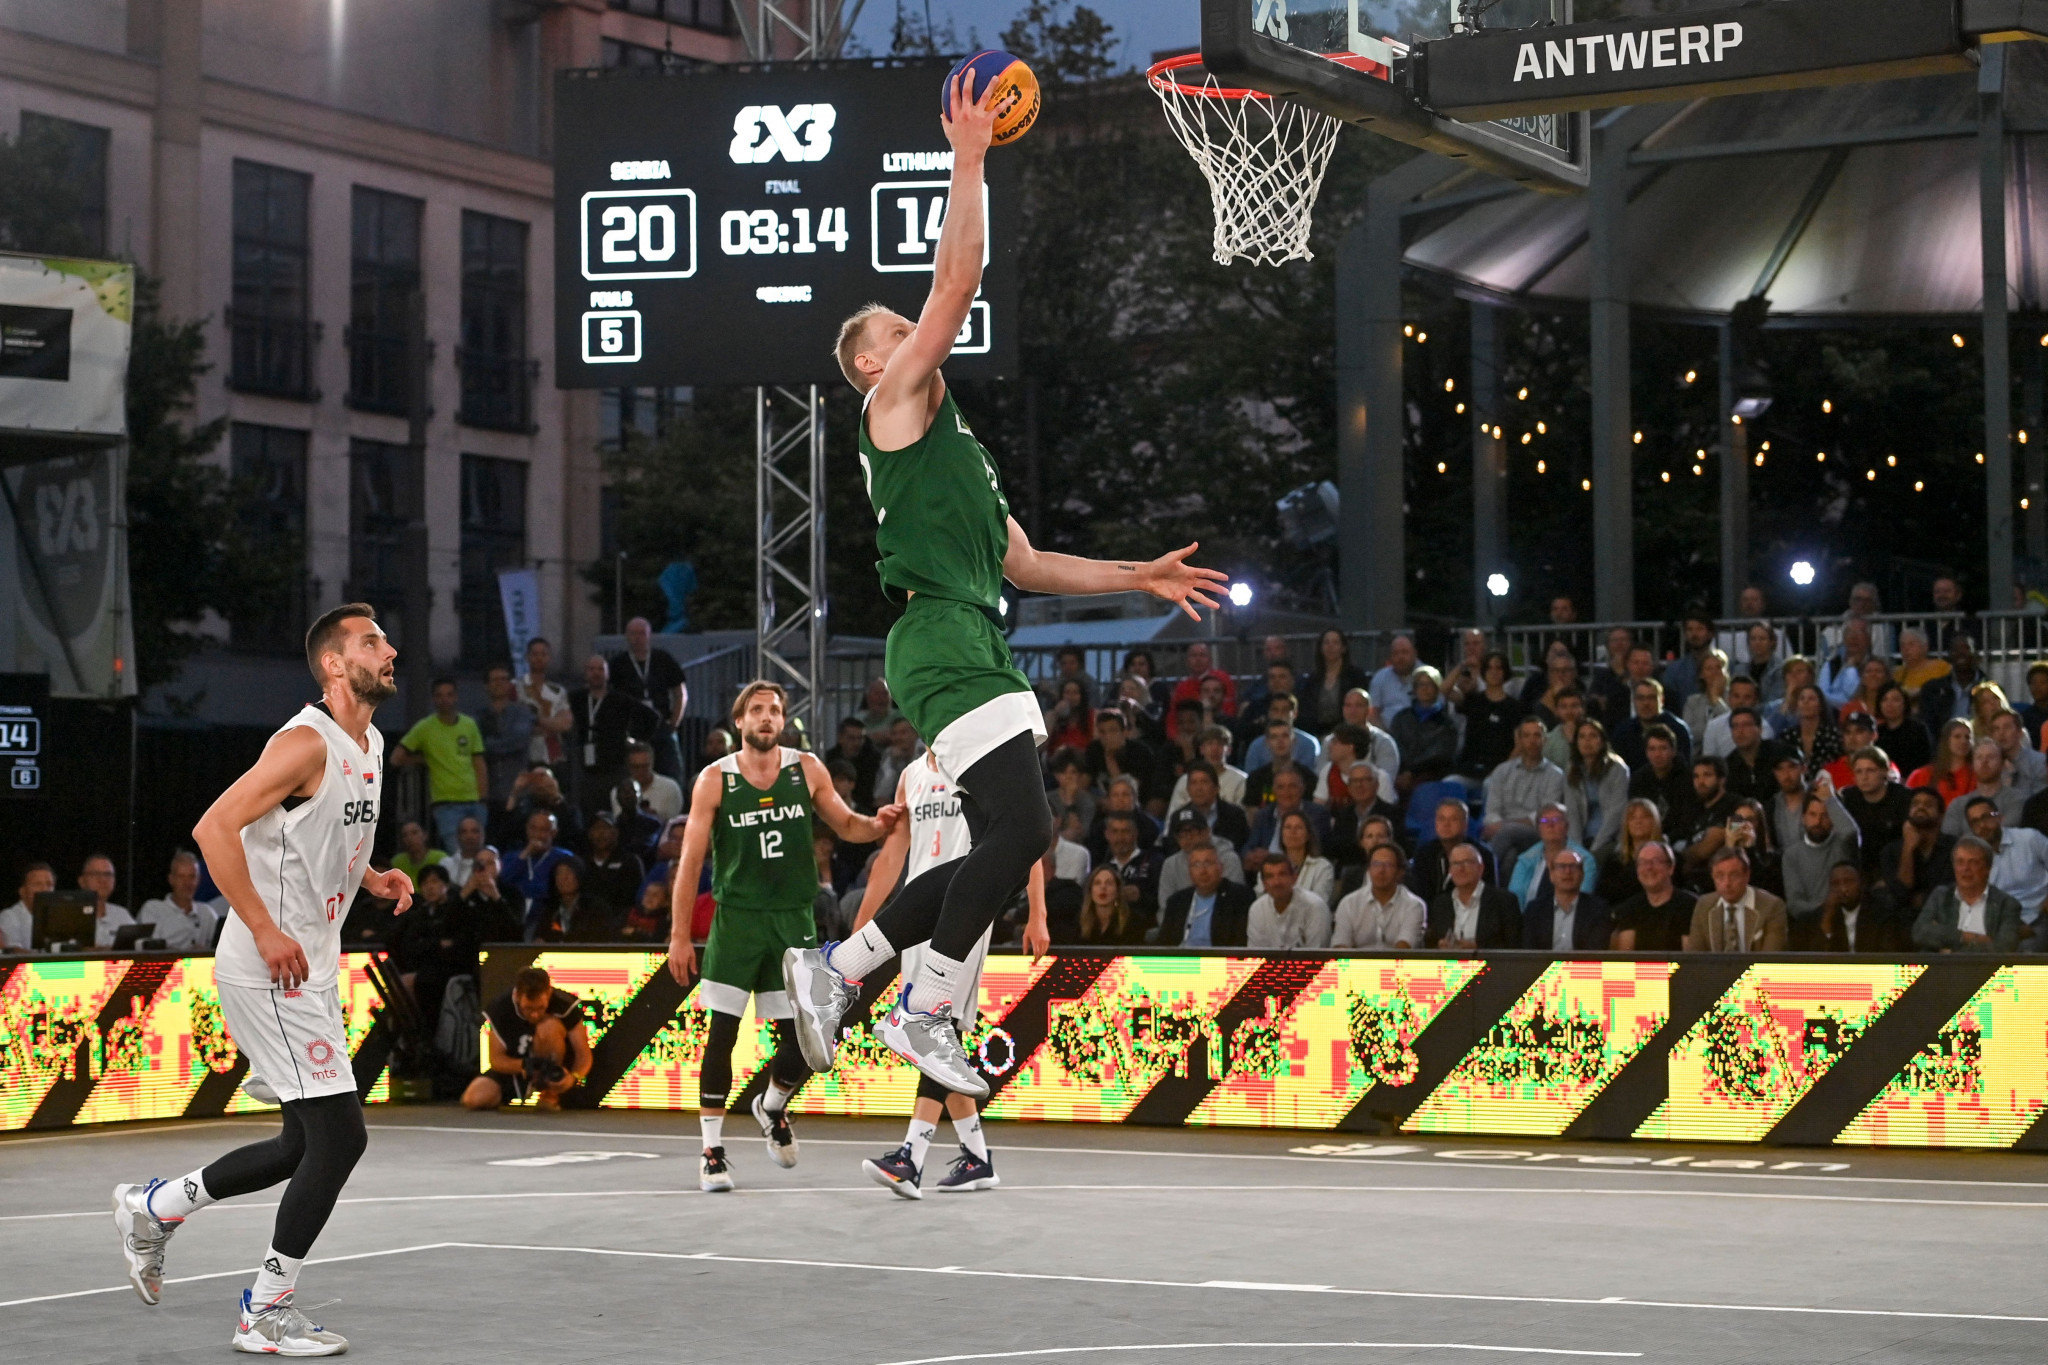 Serbia, playing in white, defeated Latvia to retain the FIBA 3x3 Europe Cup men's title ©Getty Images